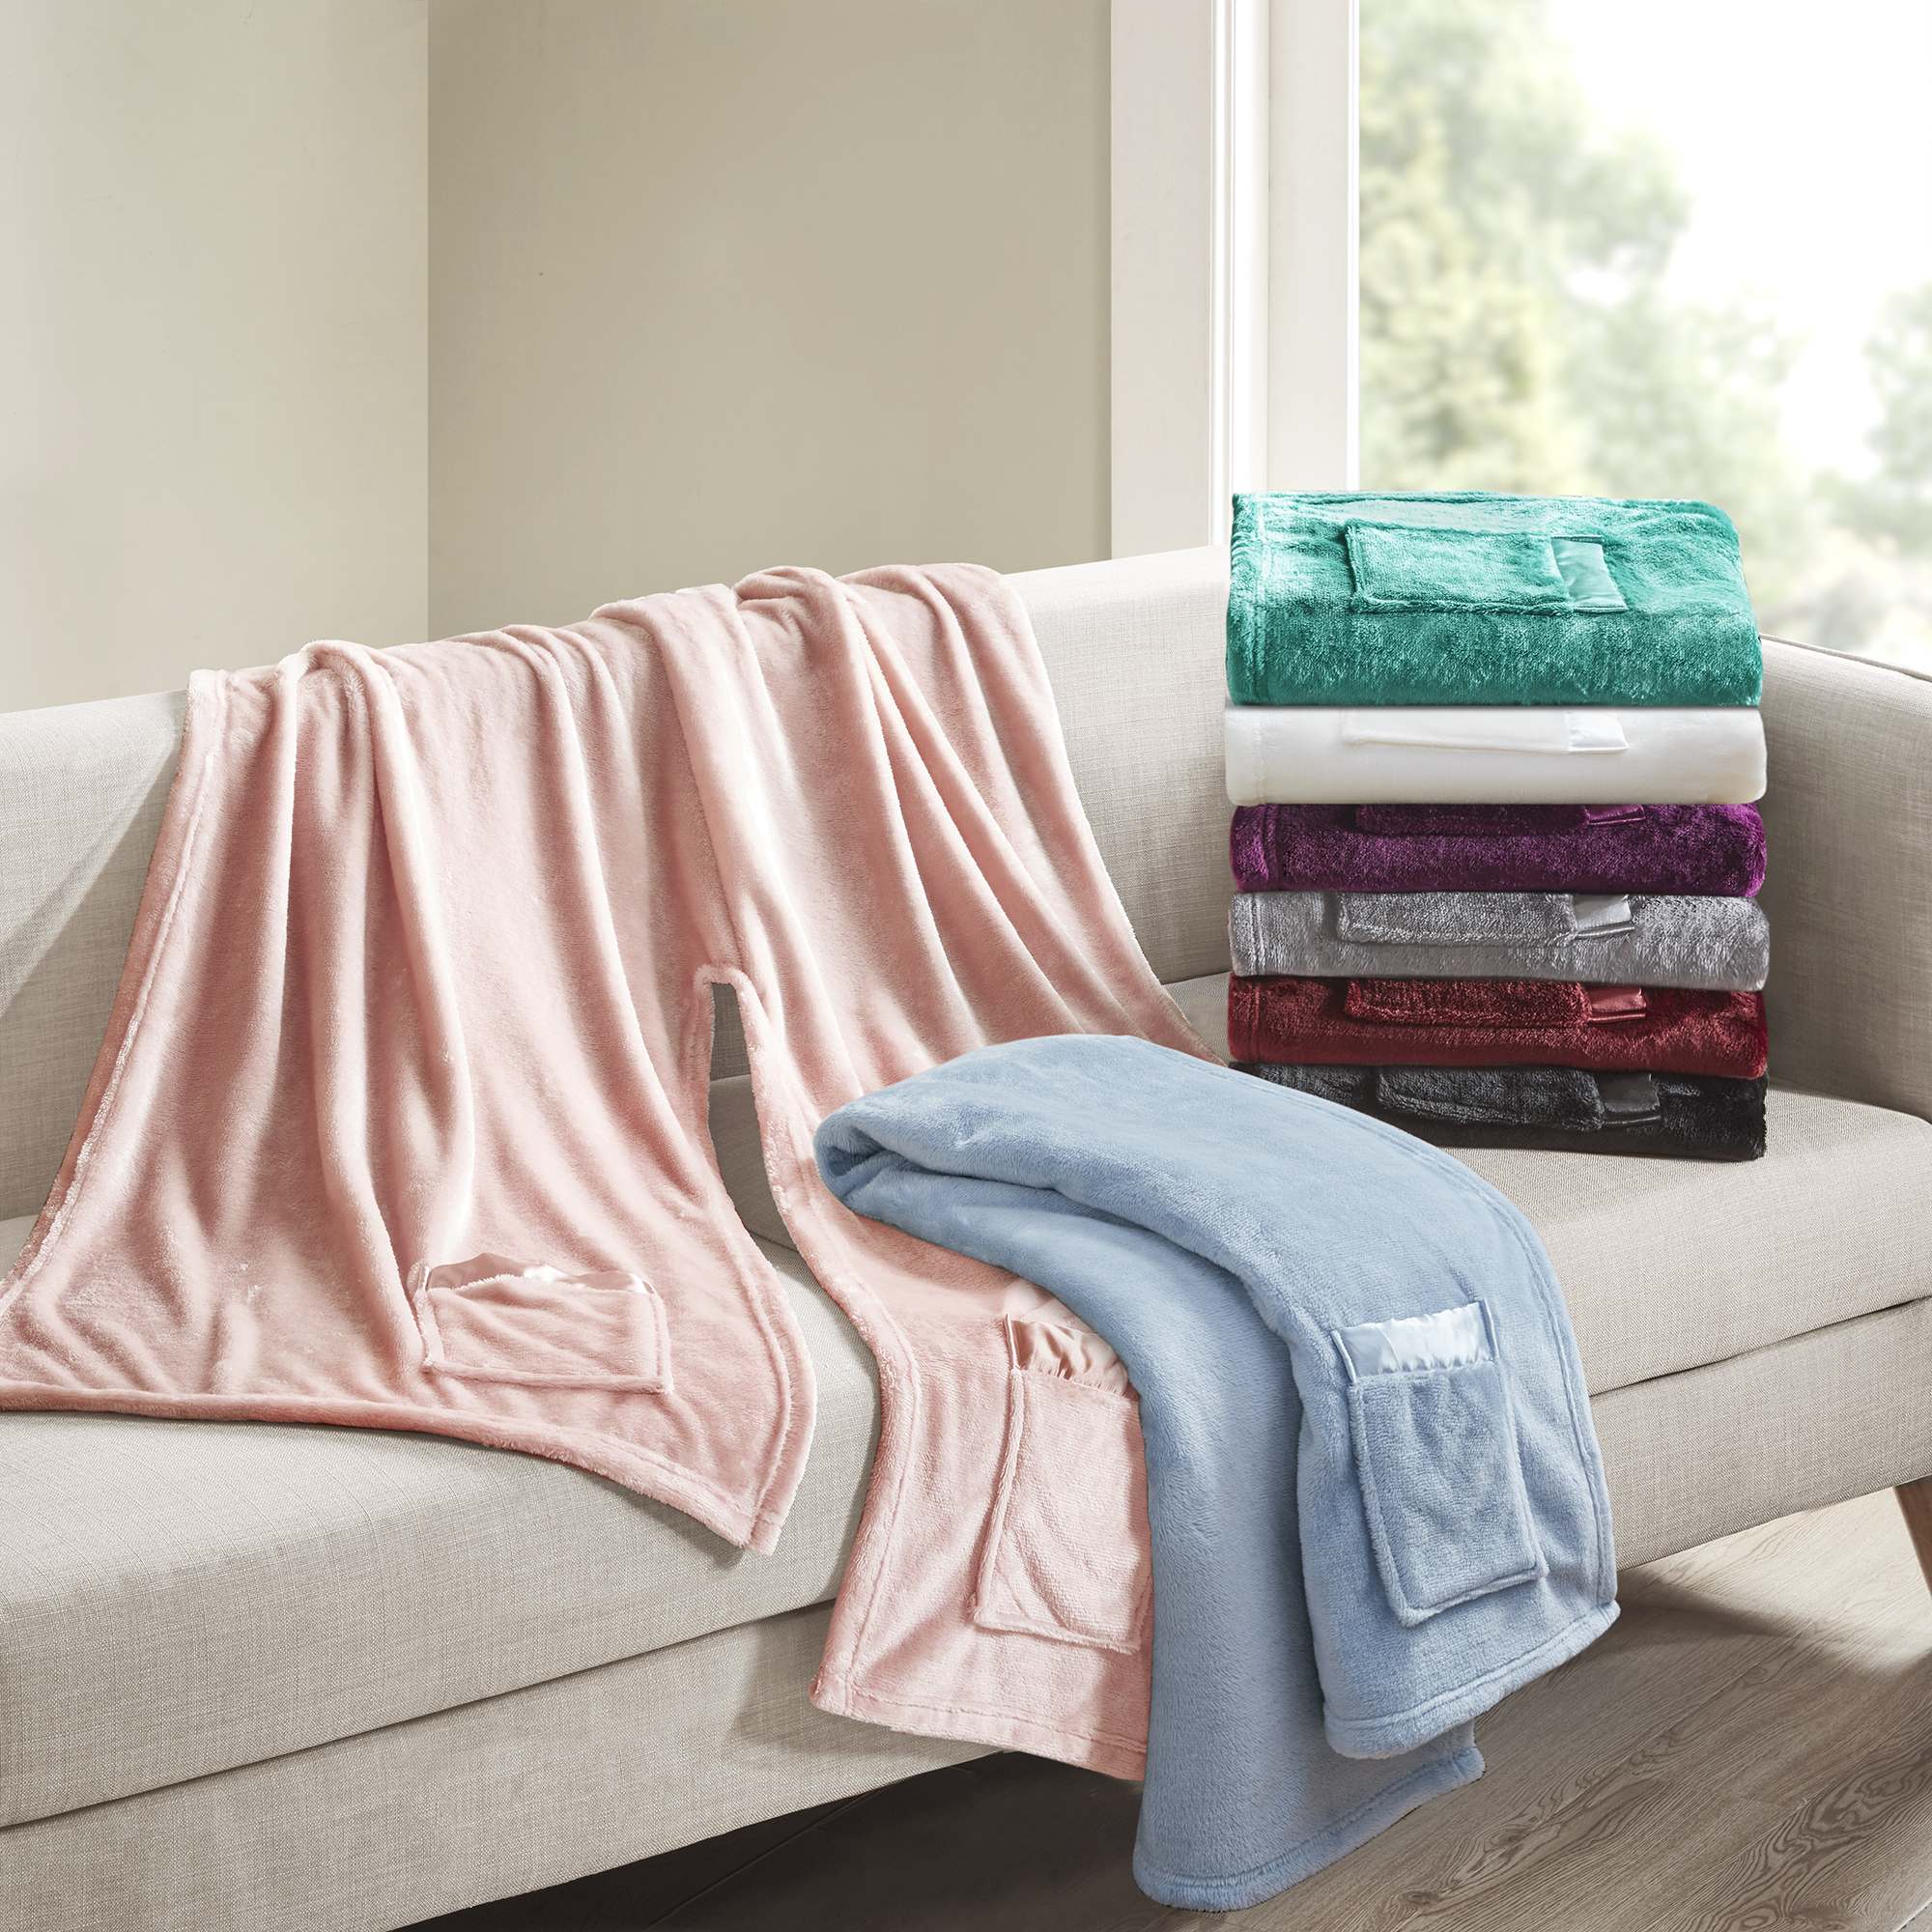 Giftable and Wearable Angel Wrap Plush Throw Blanket with Pockets, Cream - image 3 of 5